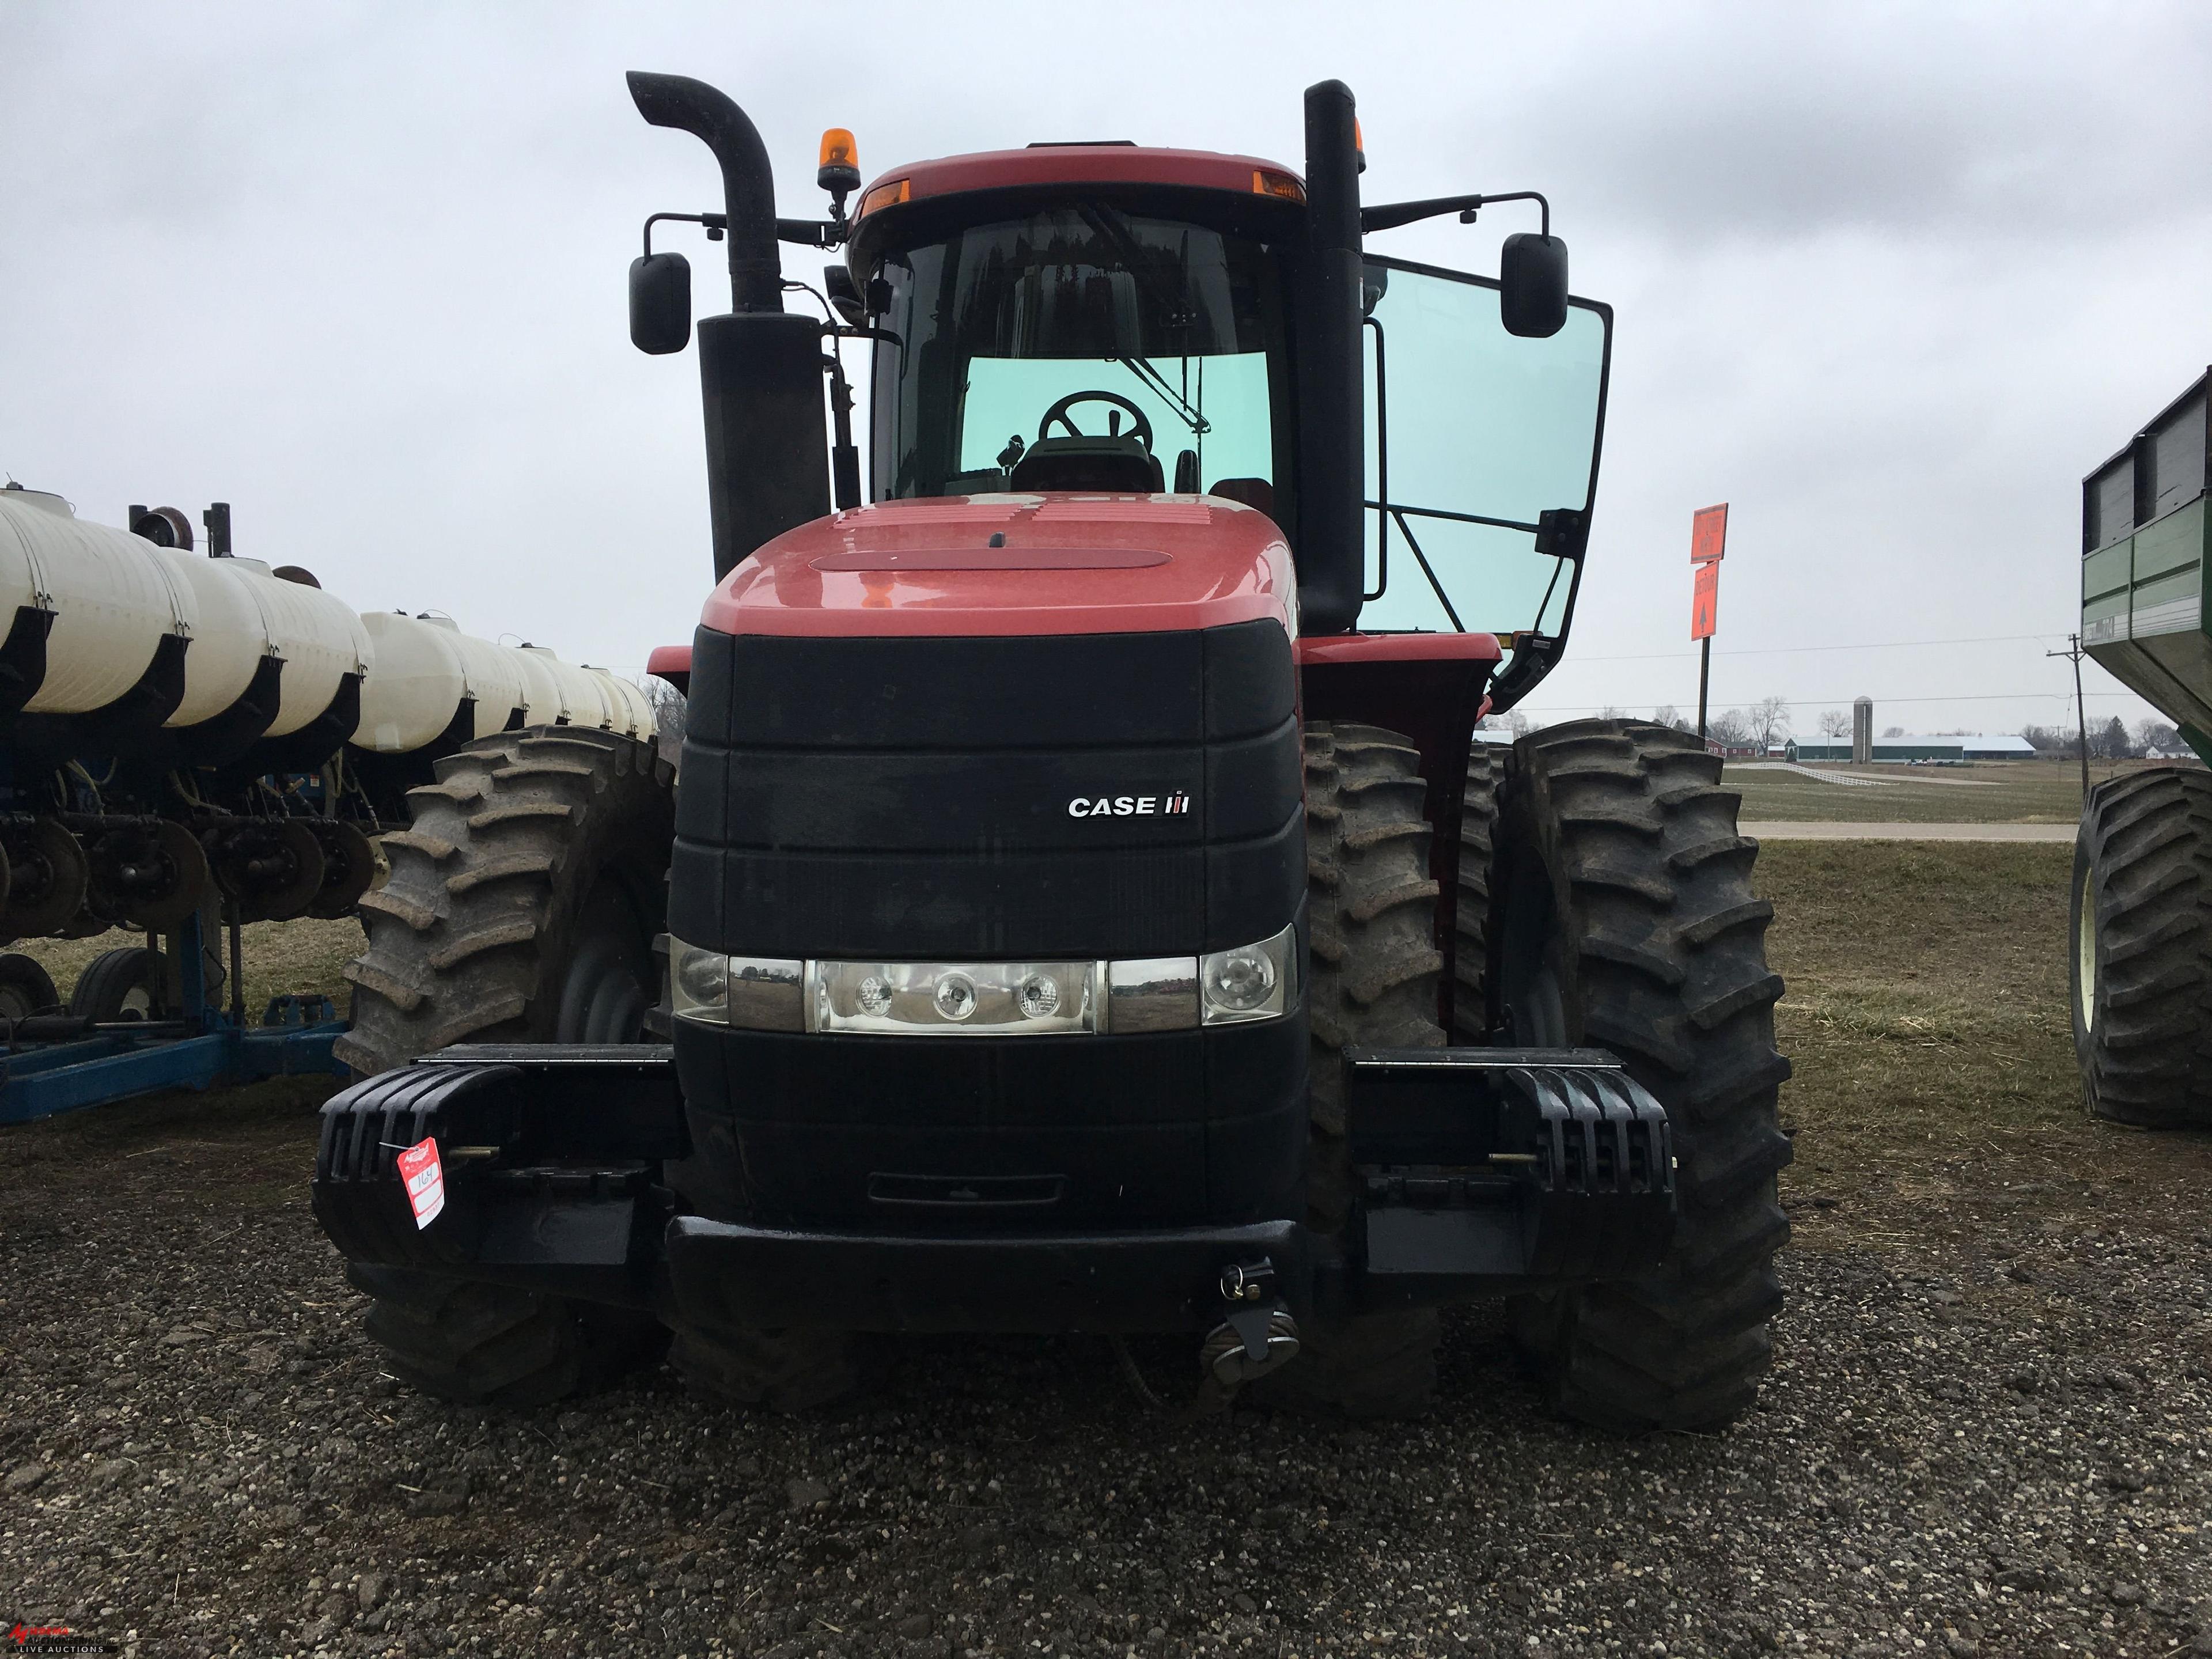 CASE IH 450 STEIGER HD, 2014, 4WD, 1000 PTO, DELUXE CAB, 6 REMOTES, FRONT A